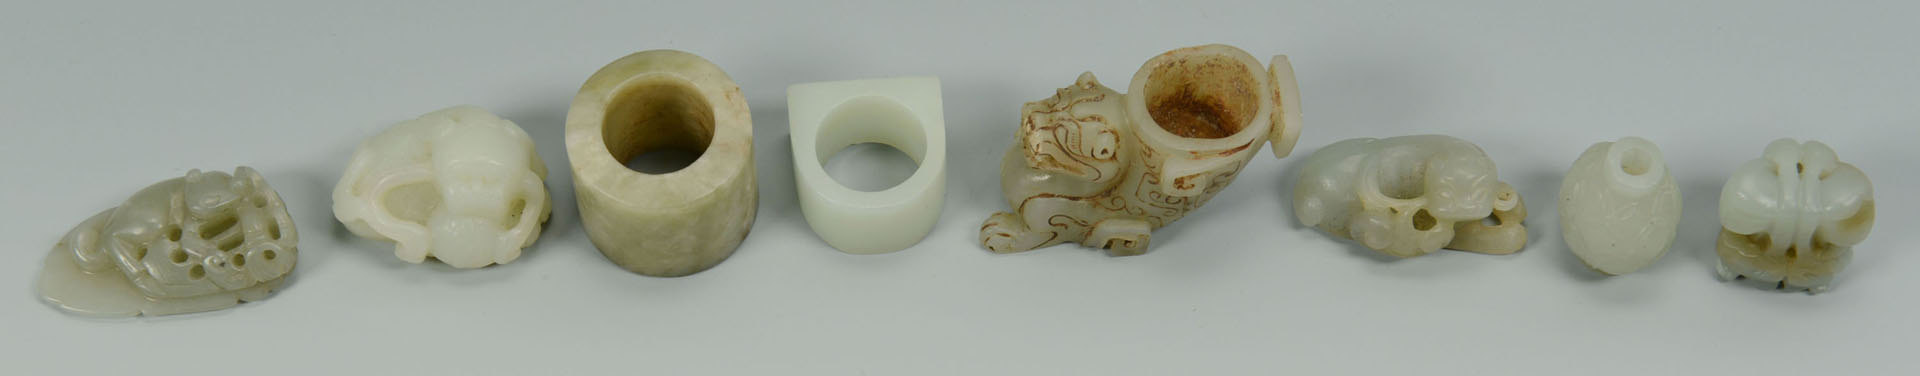 Lot 10: Grouping of 8 Carved Chinese Jade Articles